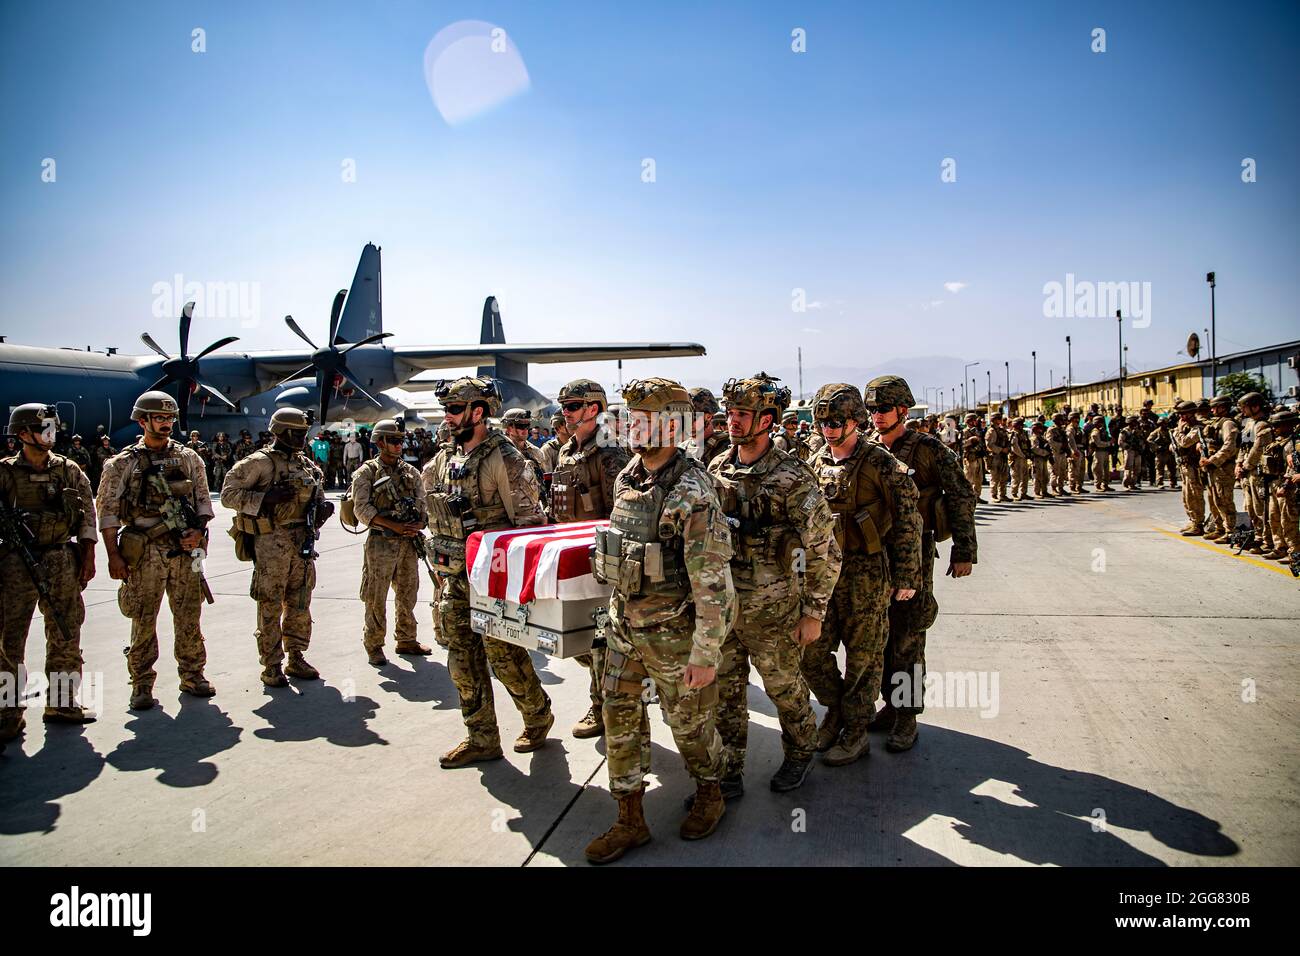 210827-M-TT571-1237 HAMID KARZAI INTERNATIONAL AIRPORT, Afghanistan (August 27, 2021) U.S. service members assigned to Joint Task Force-Crisis Response are pallbearers for the service members killed in action during operations at Hamid Karzai International Airport, Aug. 27. U.S. service members are assisting the Department of State with a Non-Combatant Evacuation operation (NEO) in Afghanistan. (U.S. Marine Corps photo by 1stLt. Mark Andries) Stock Photo